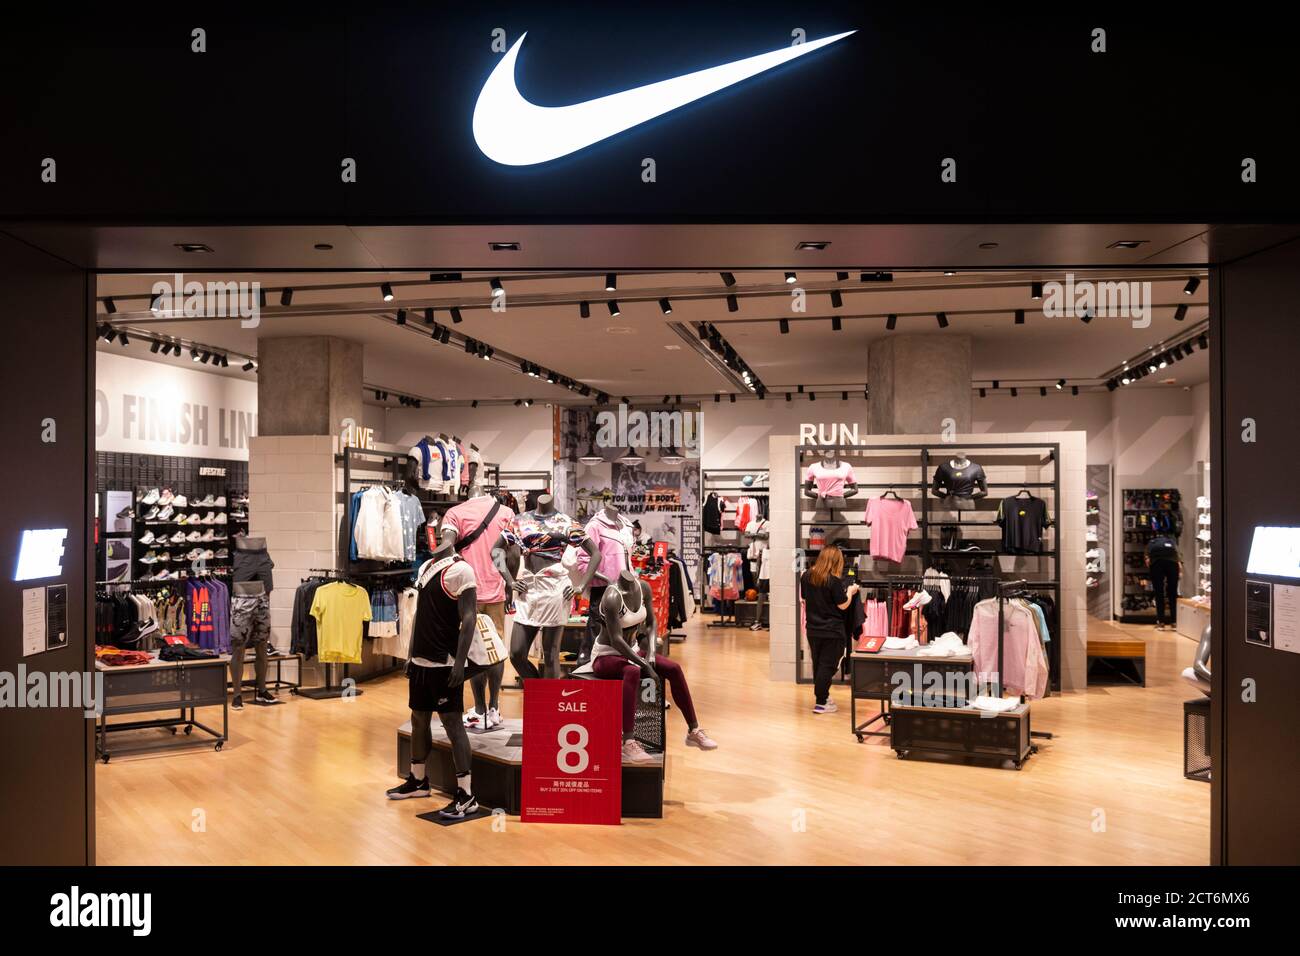 Nike Store 2020 High Resolution Stock Photography and Images - Alamy